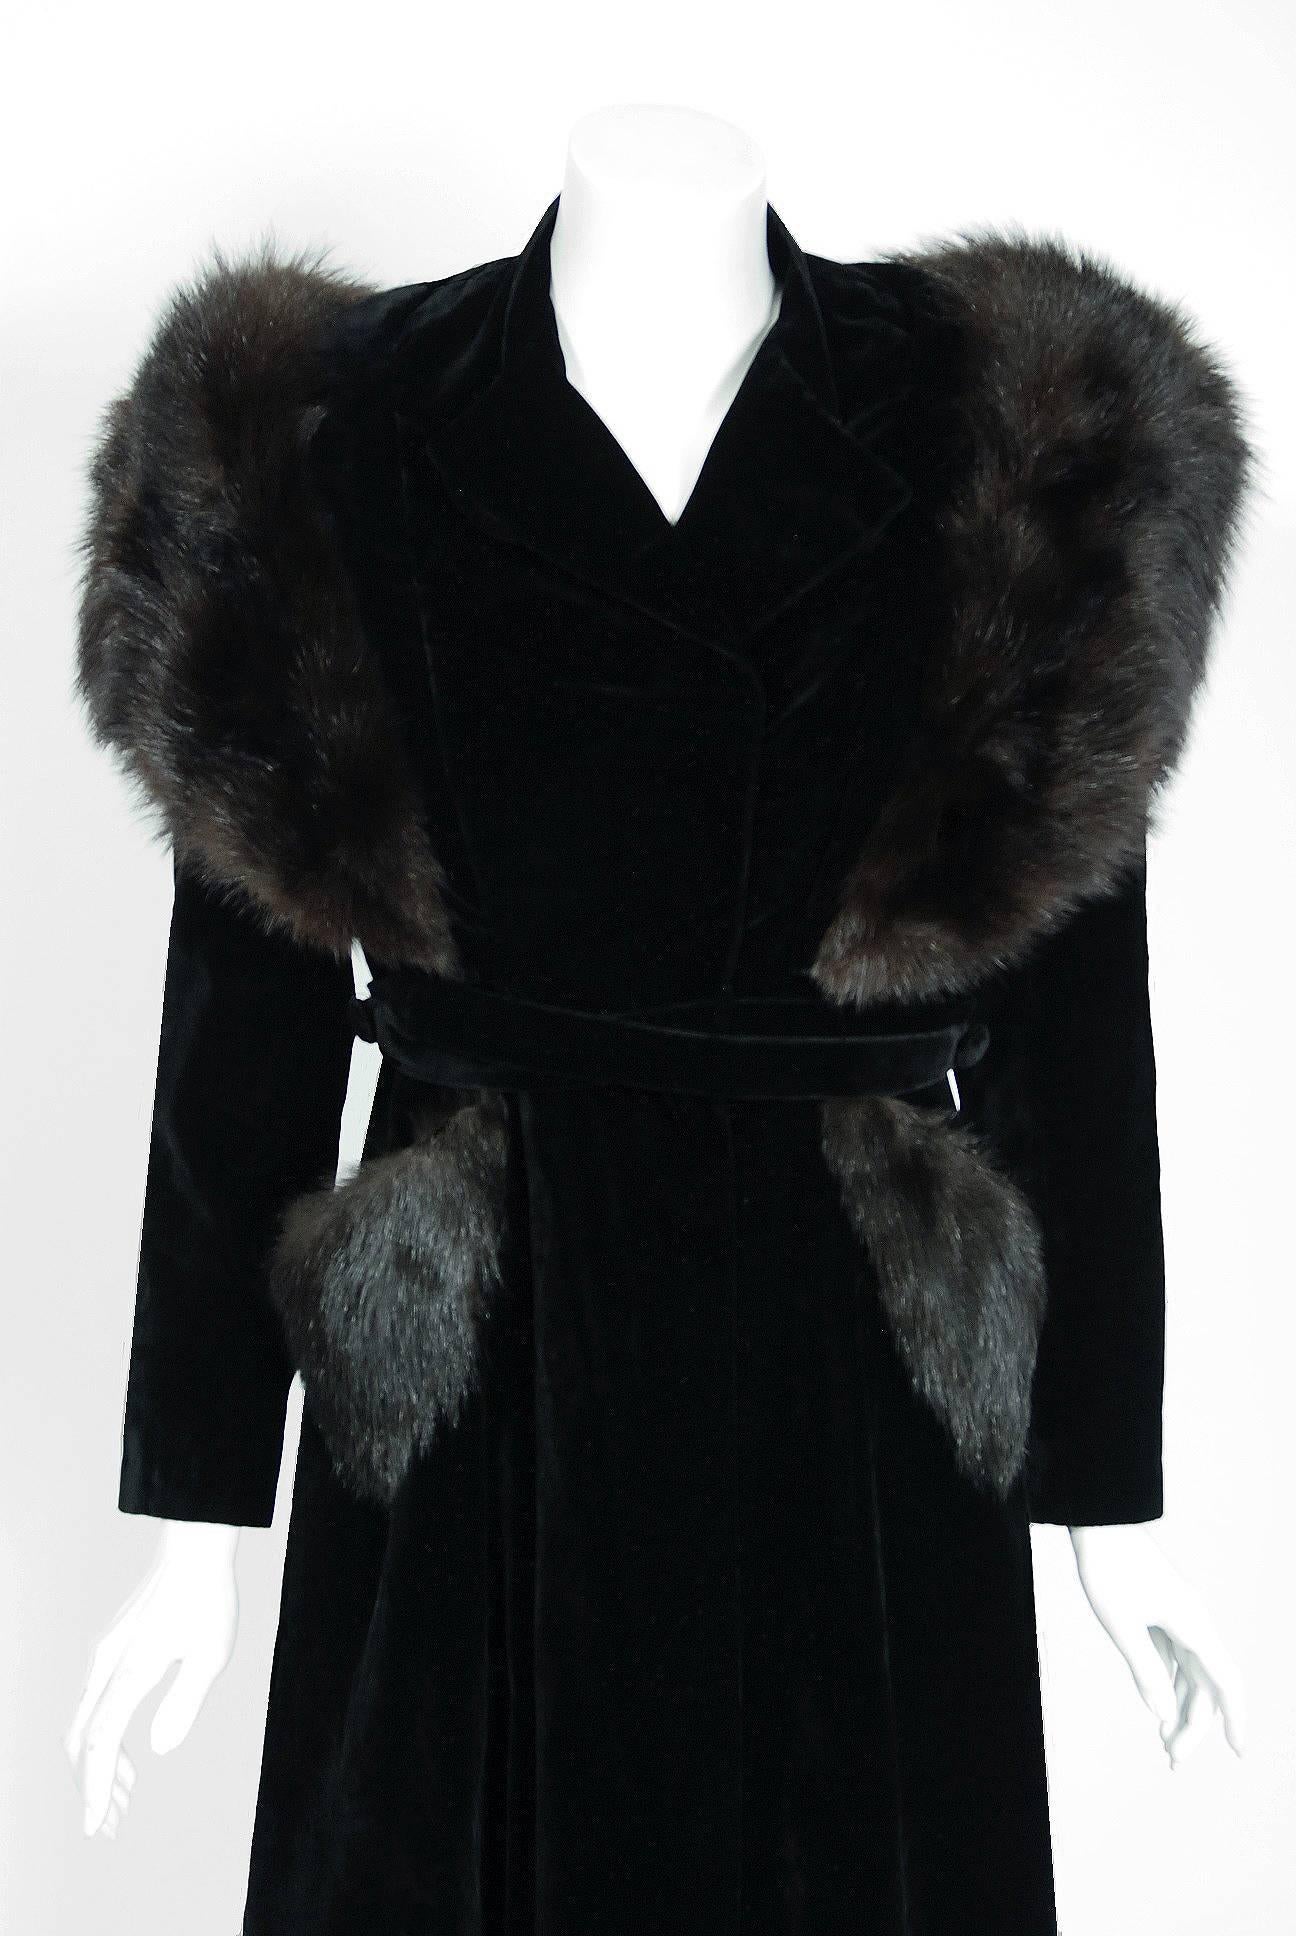 Breathtaking early 1940's A.W.B Boulevard designer coat in the most fabulous black silk-velvet and genuine fox-fur combination. The construction is impeccable and has the type of seamed pattern work one rarely sees today. The garment has the most